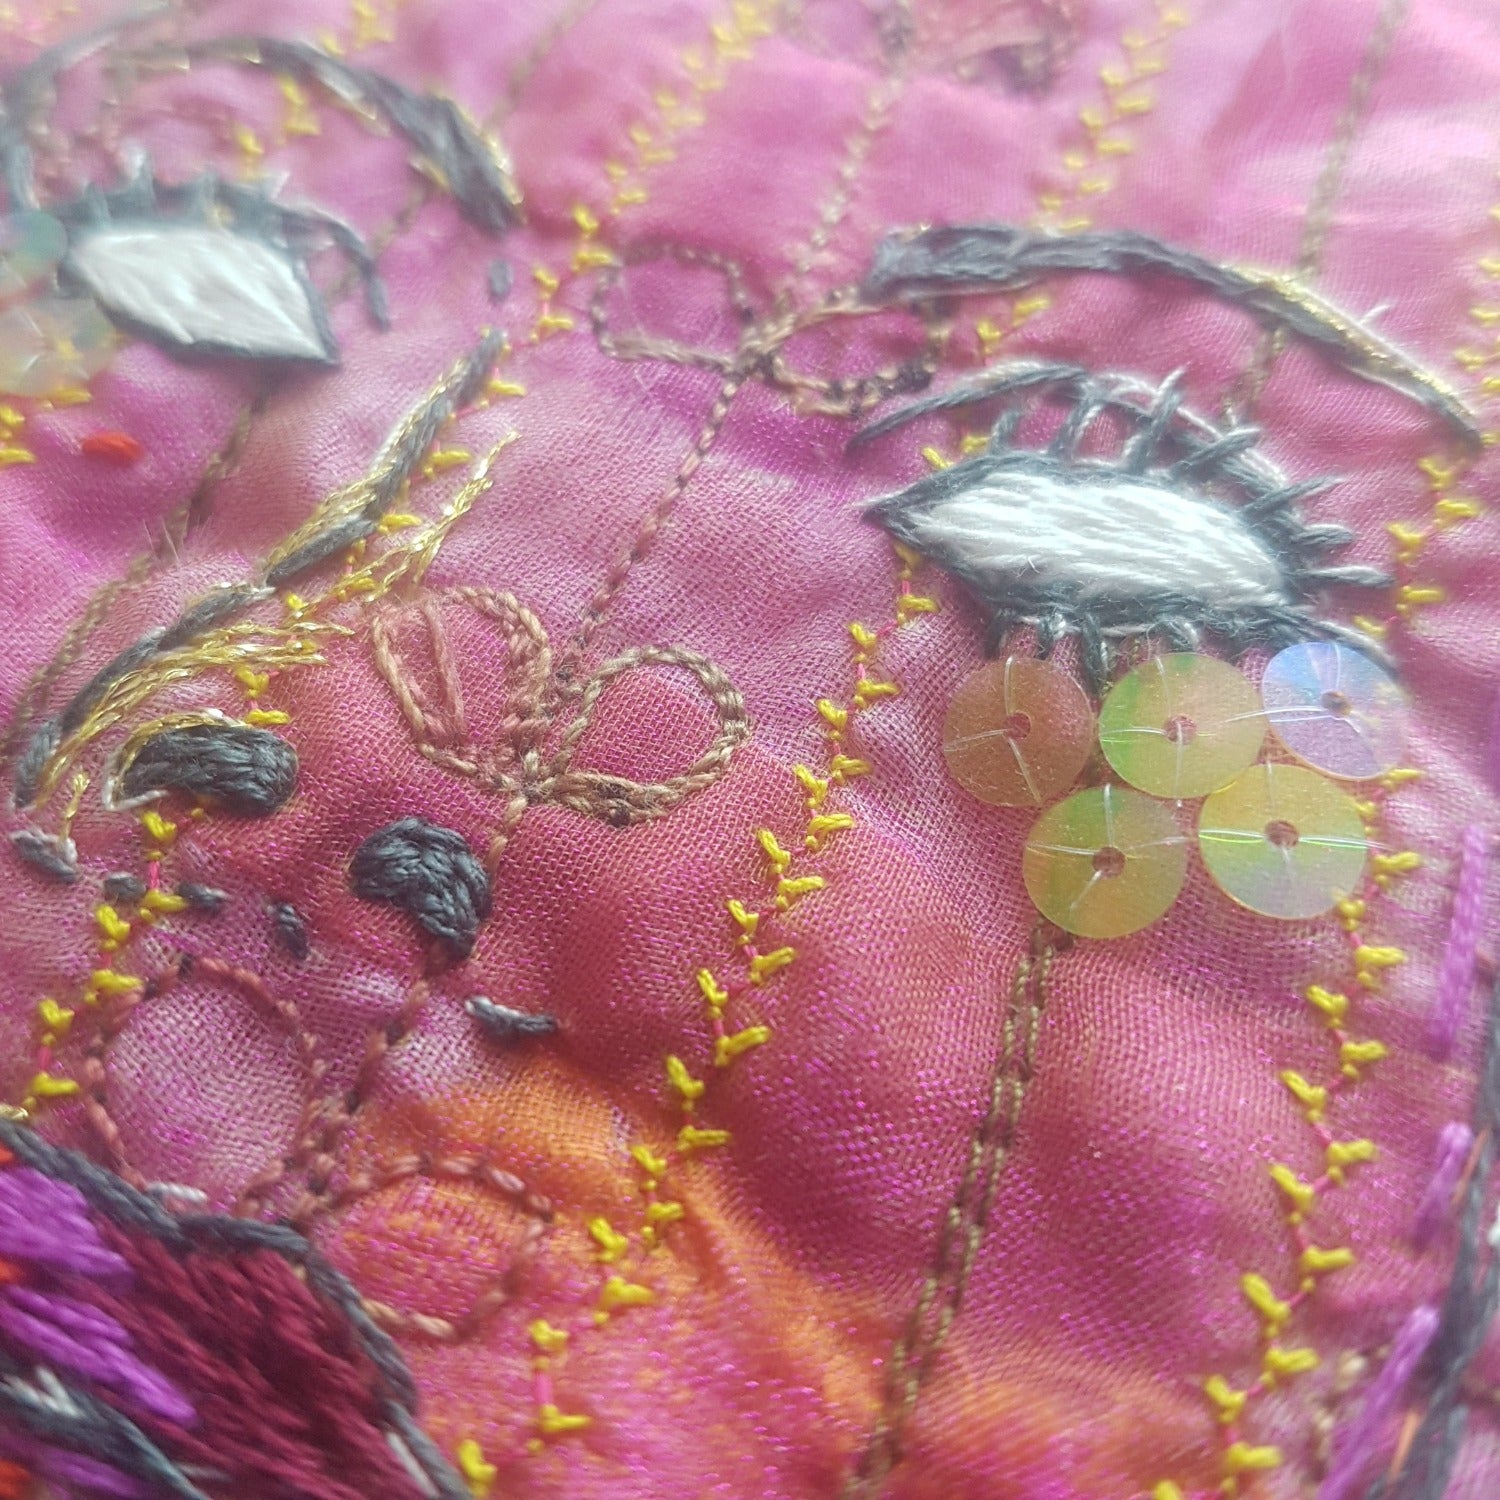 Embroidery close up showing sequins and eyes